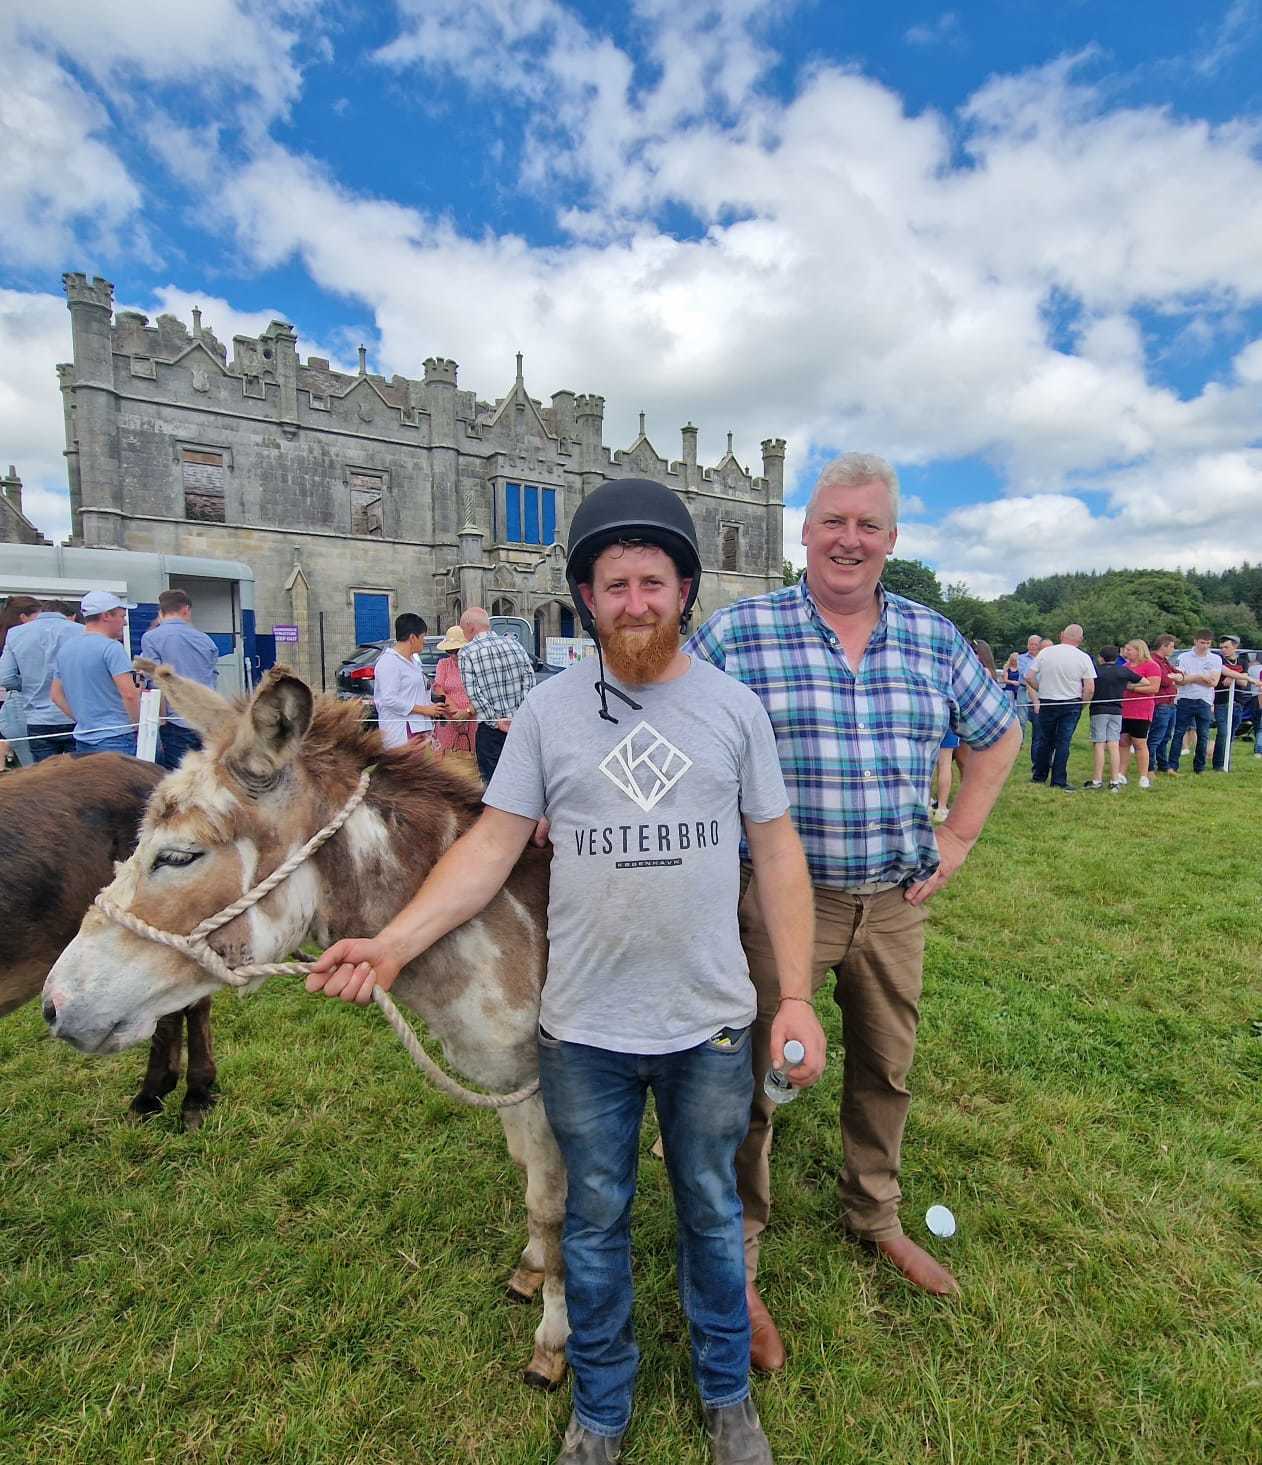 Winner of the Donkey Derby Liam Og Leonard pictured with Daniel the donkey and event sponsor Joe Maguire of Sydare Eggs. 